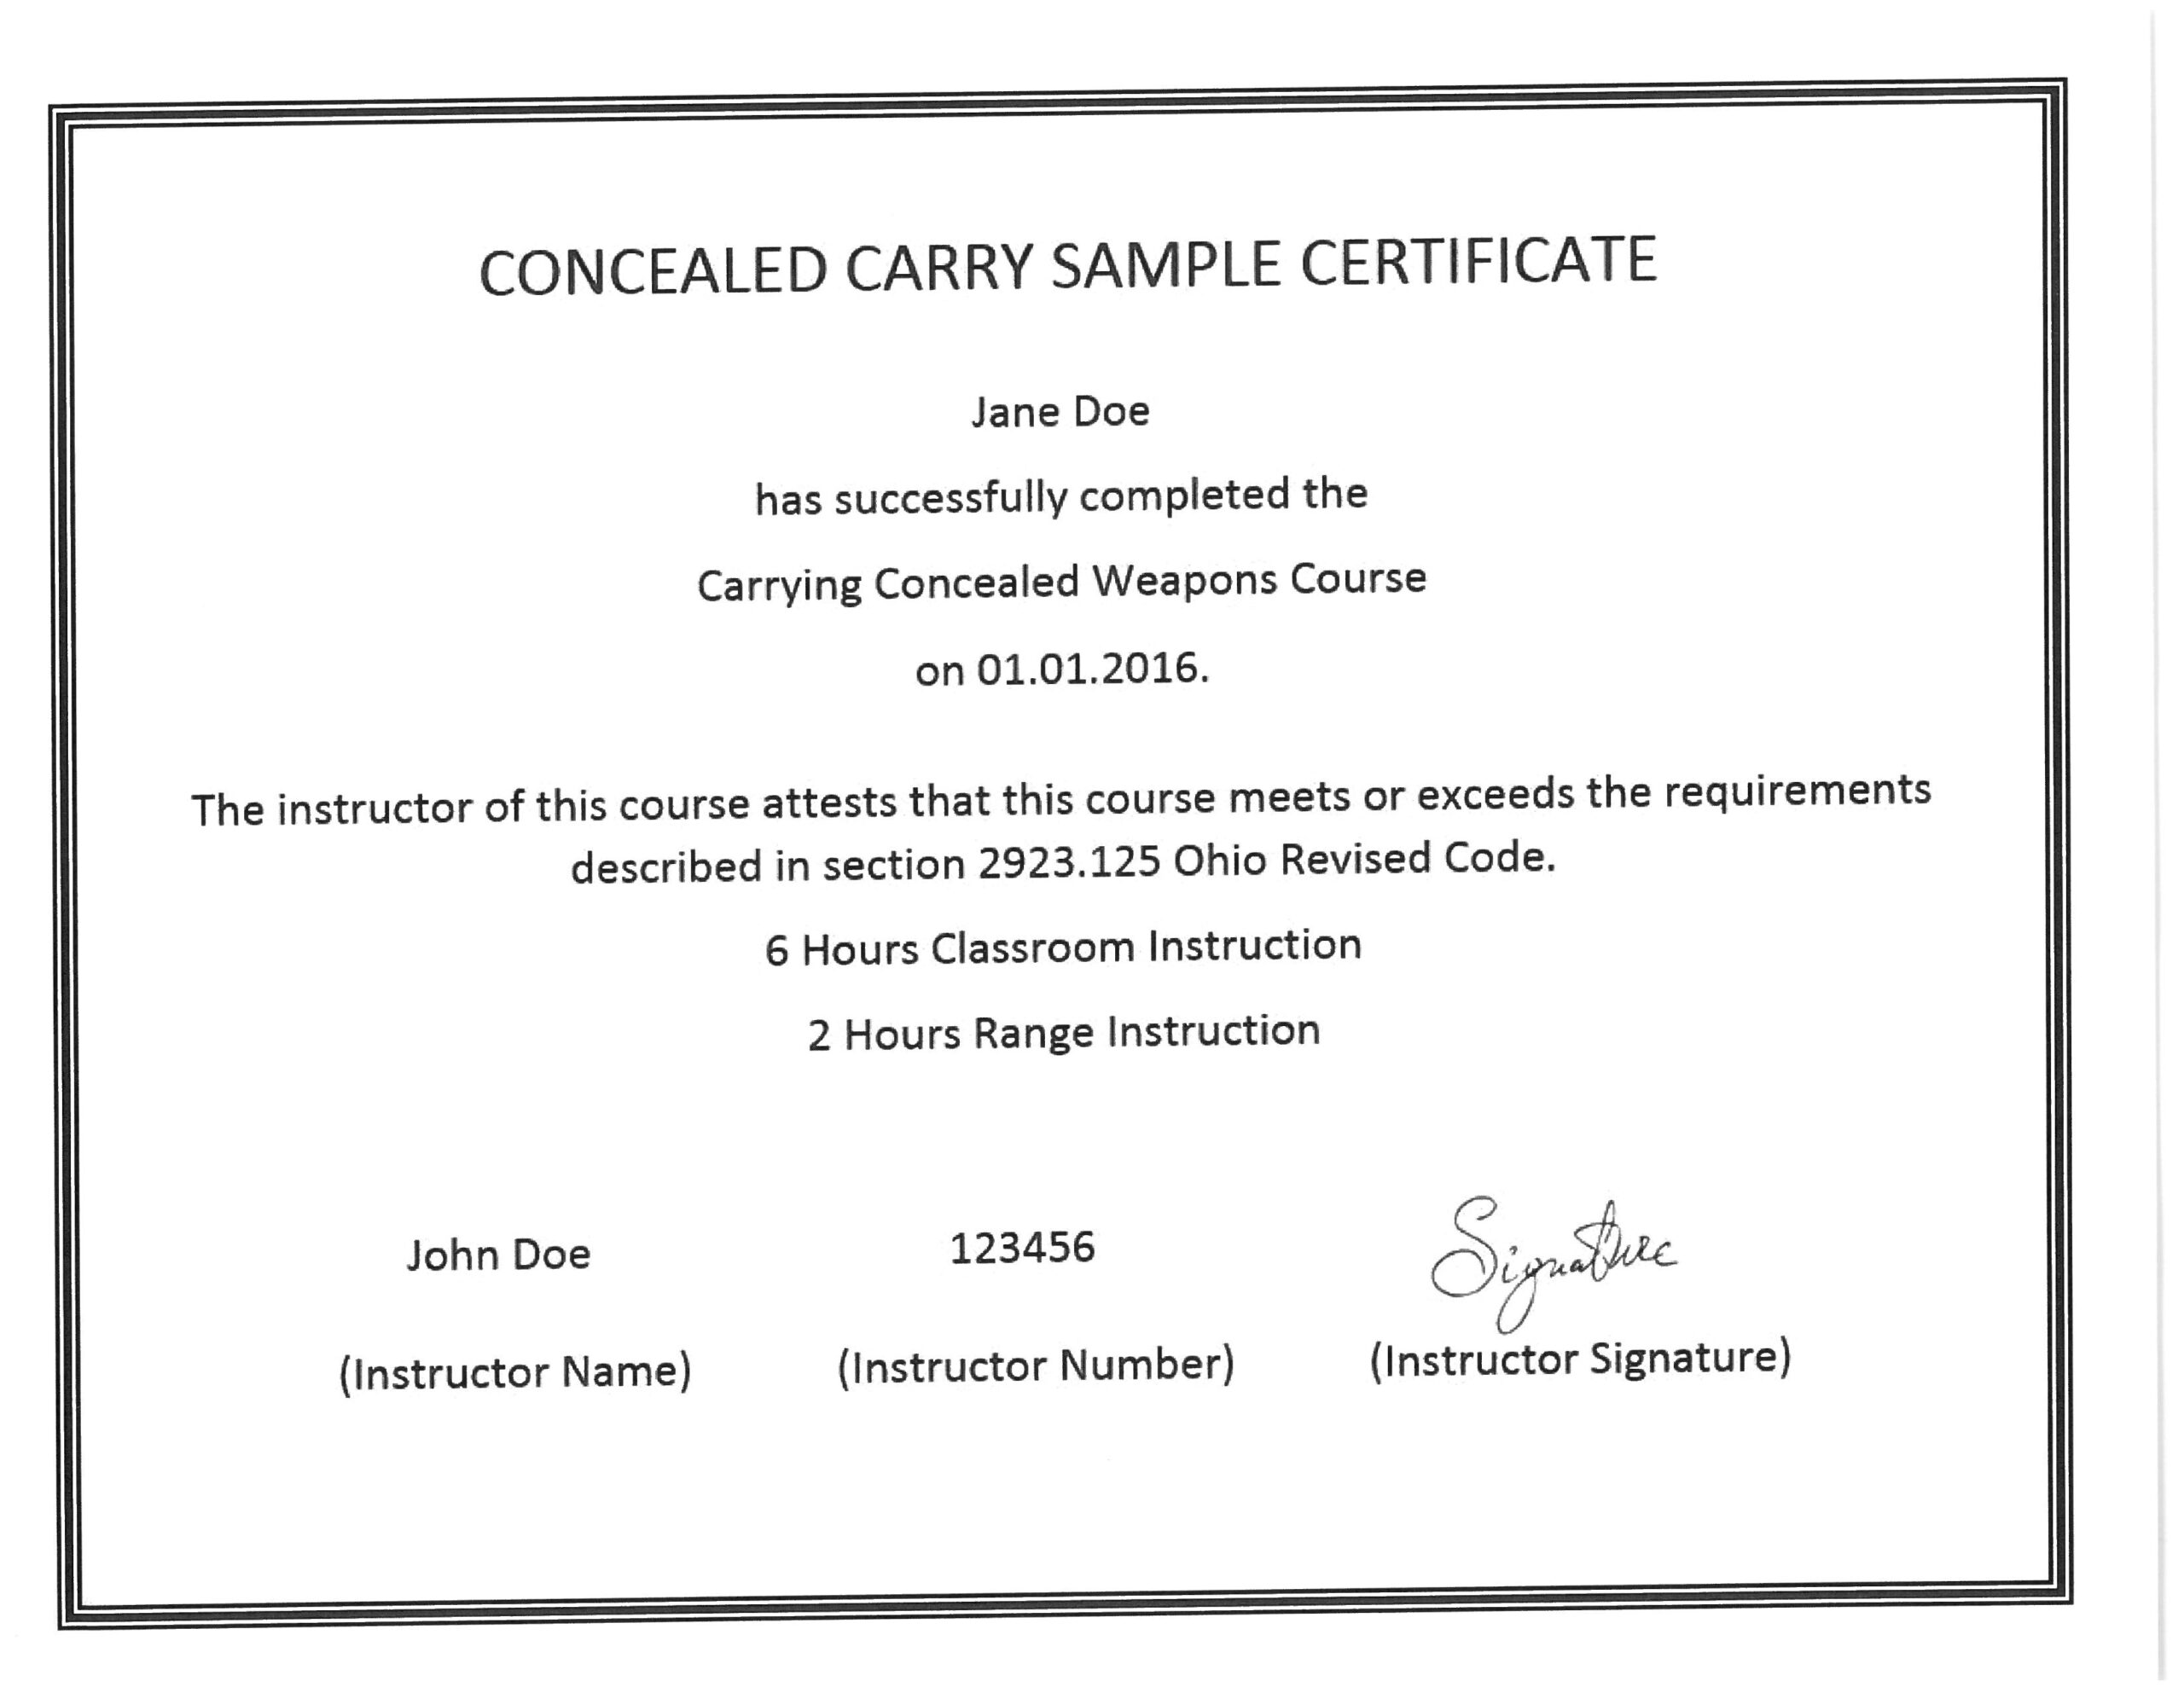 how long is a concealed carry class certificate good for